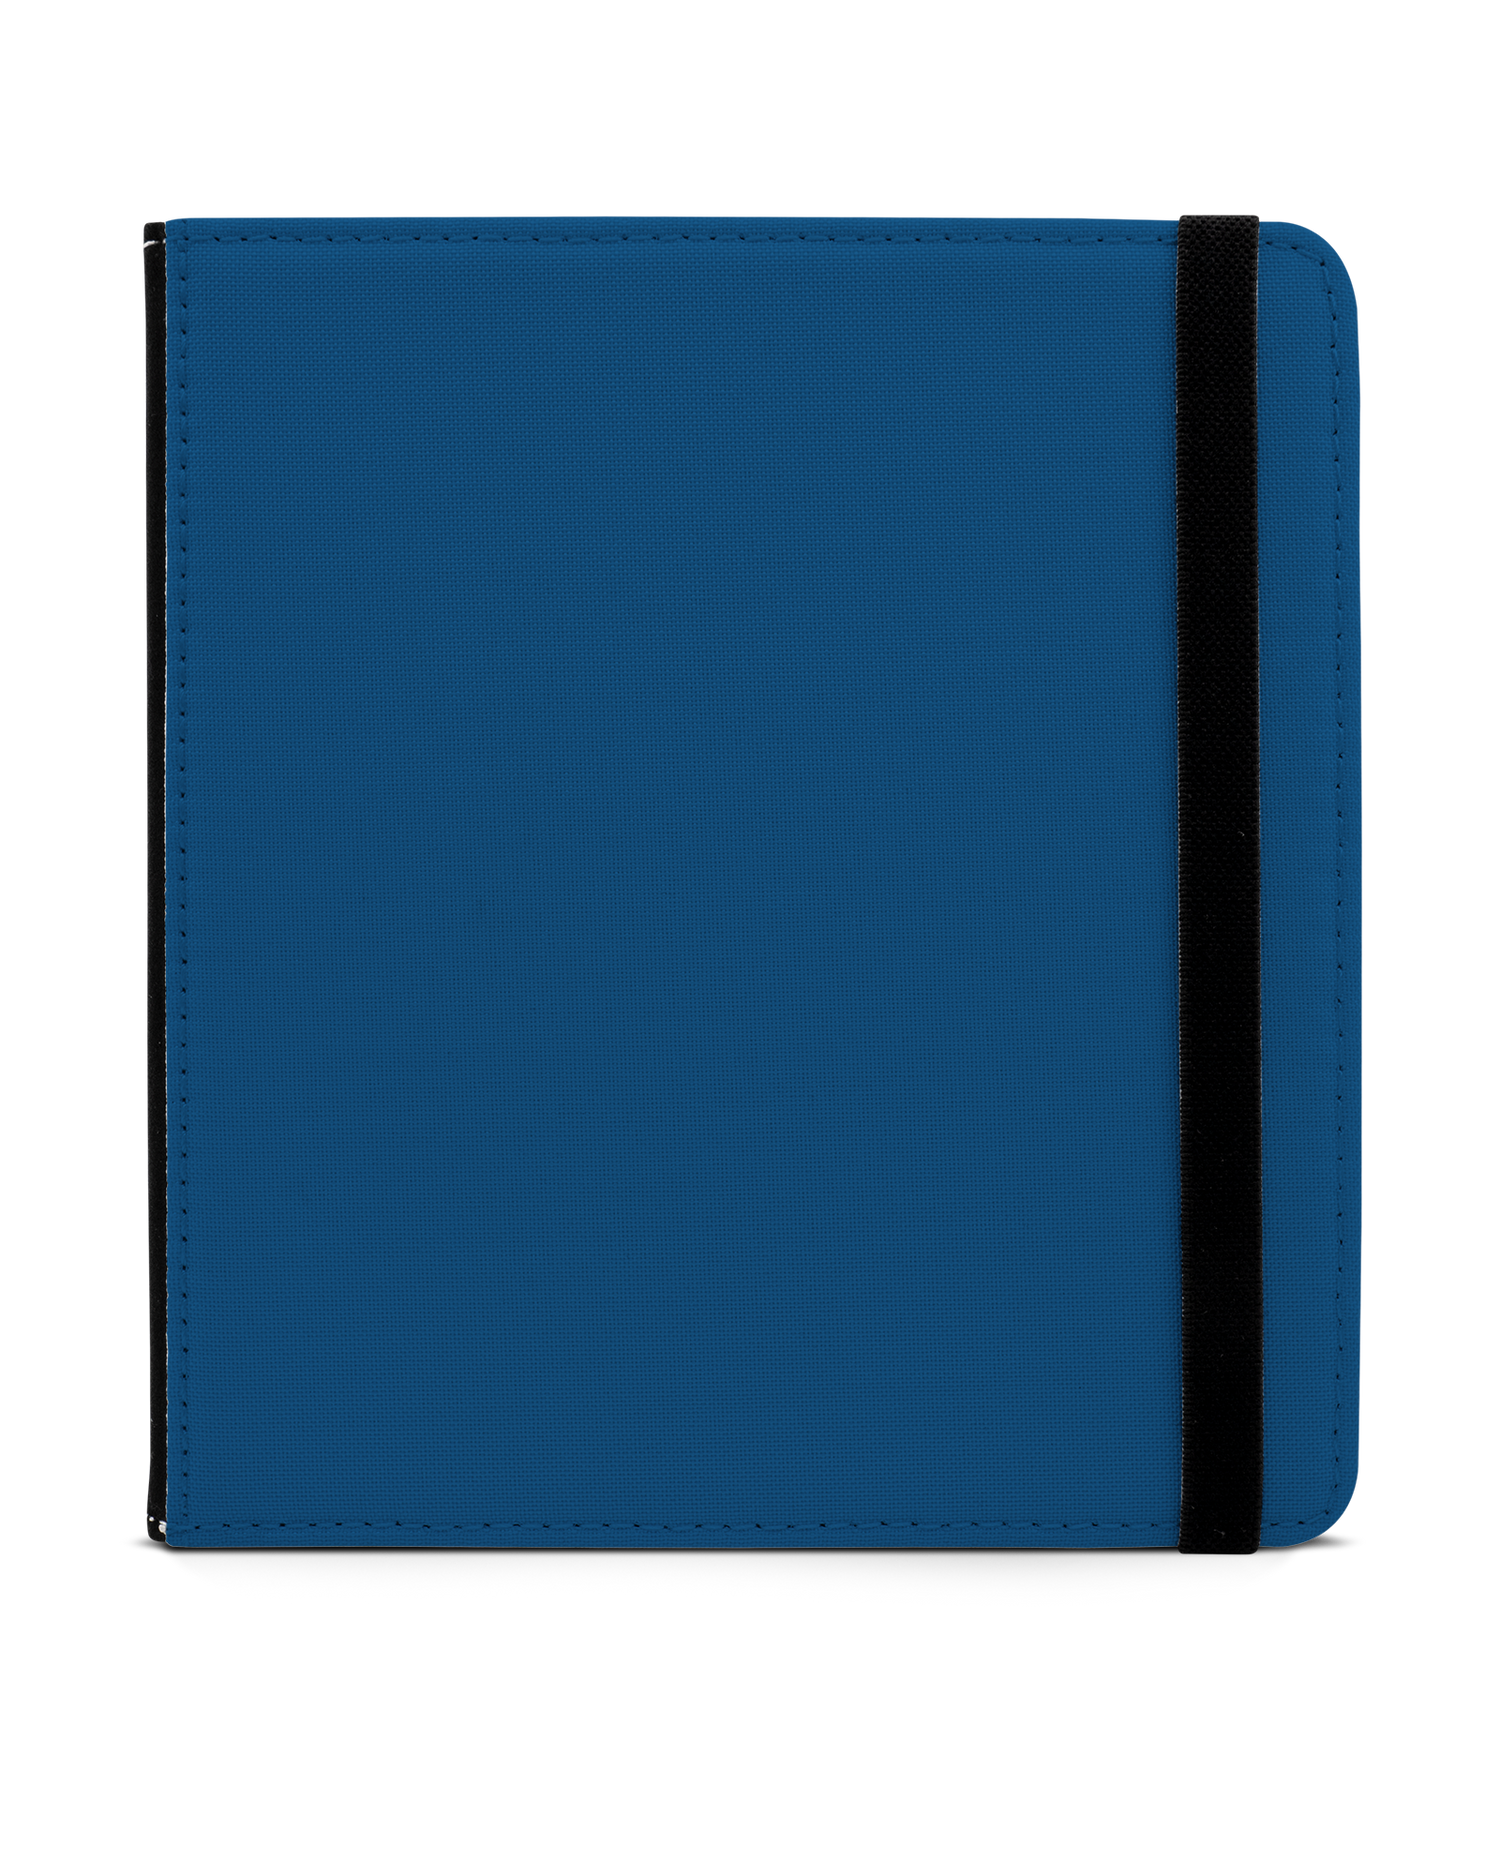 CLASSIC BLUE eReader Case for tolino vision 6: Front View